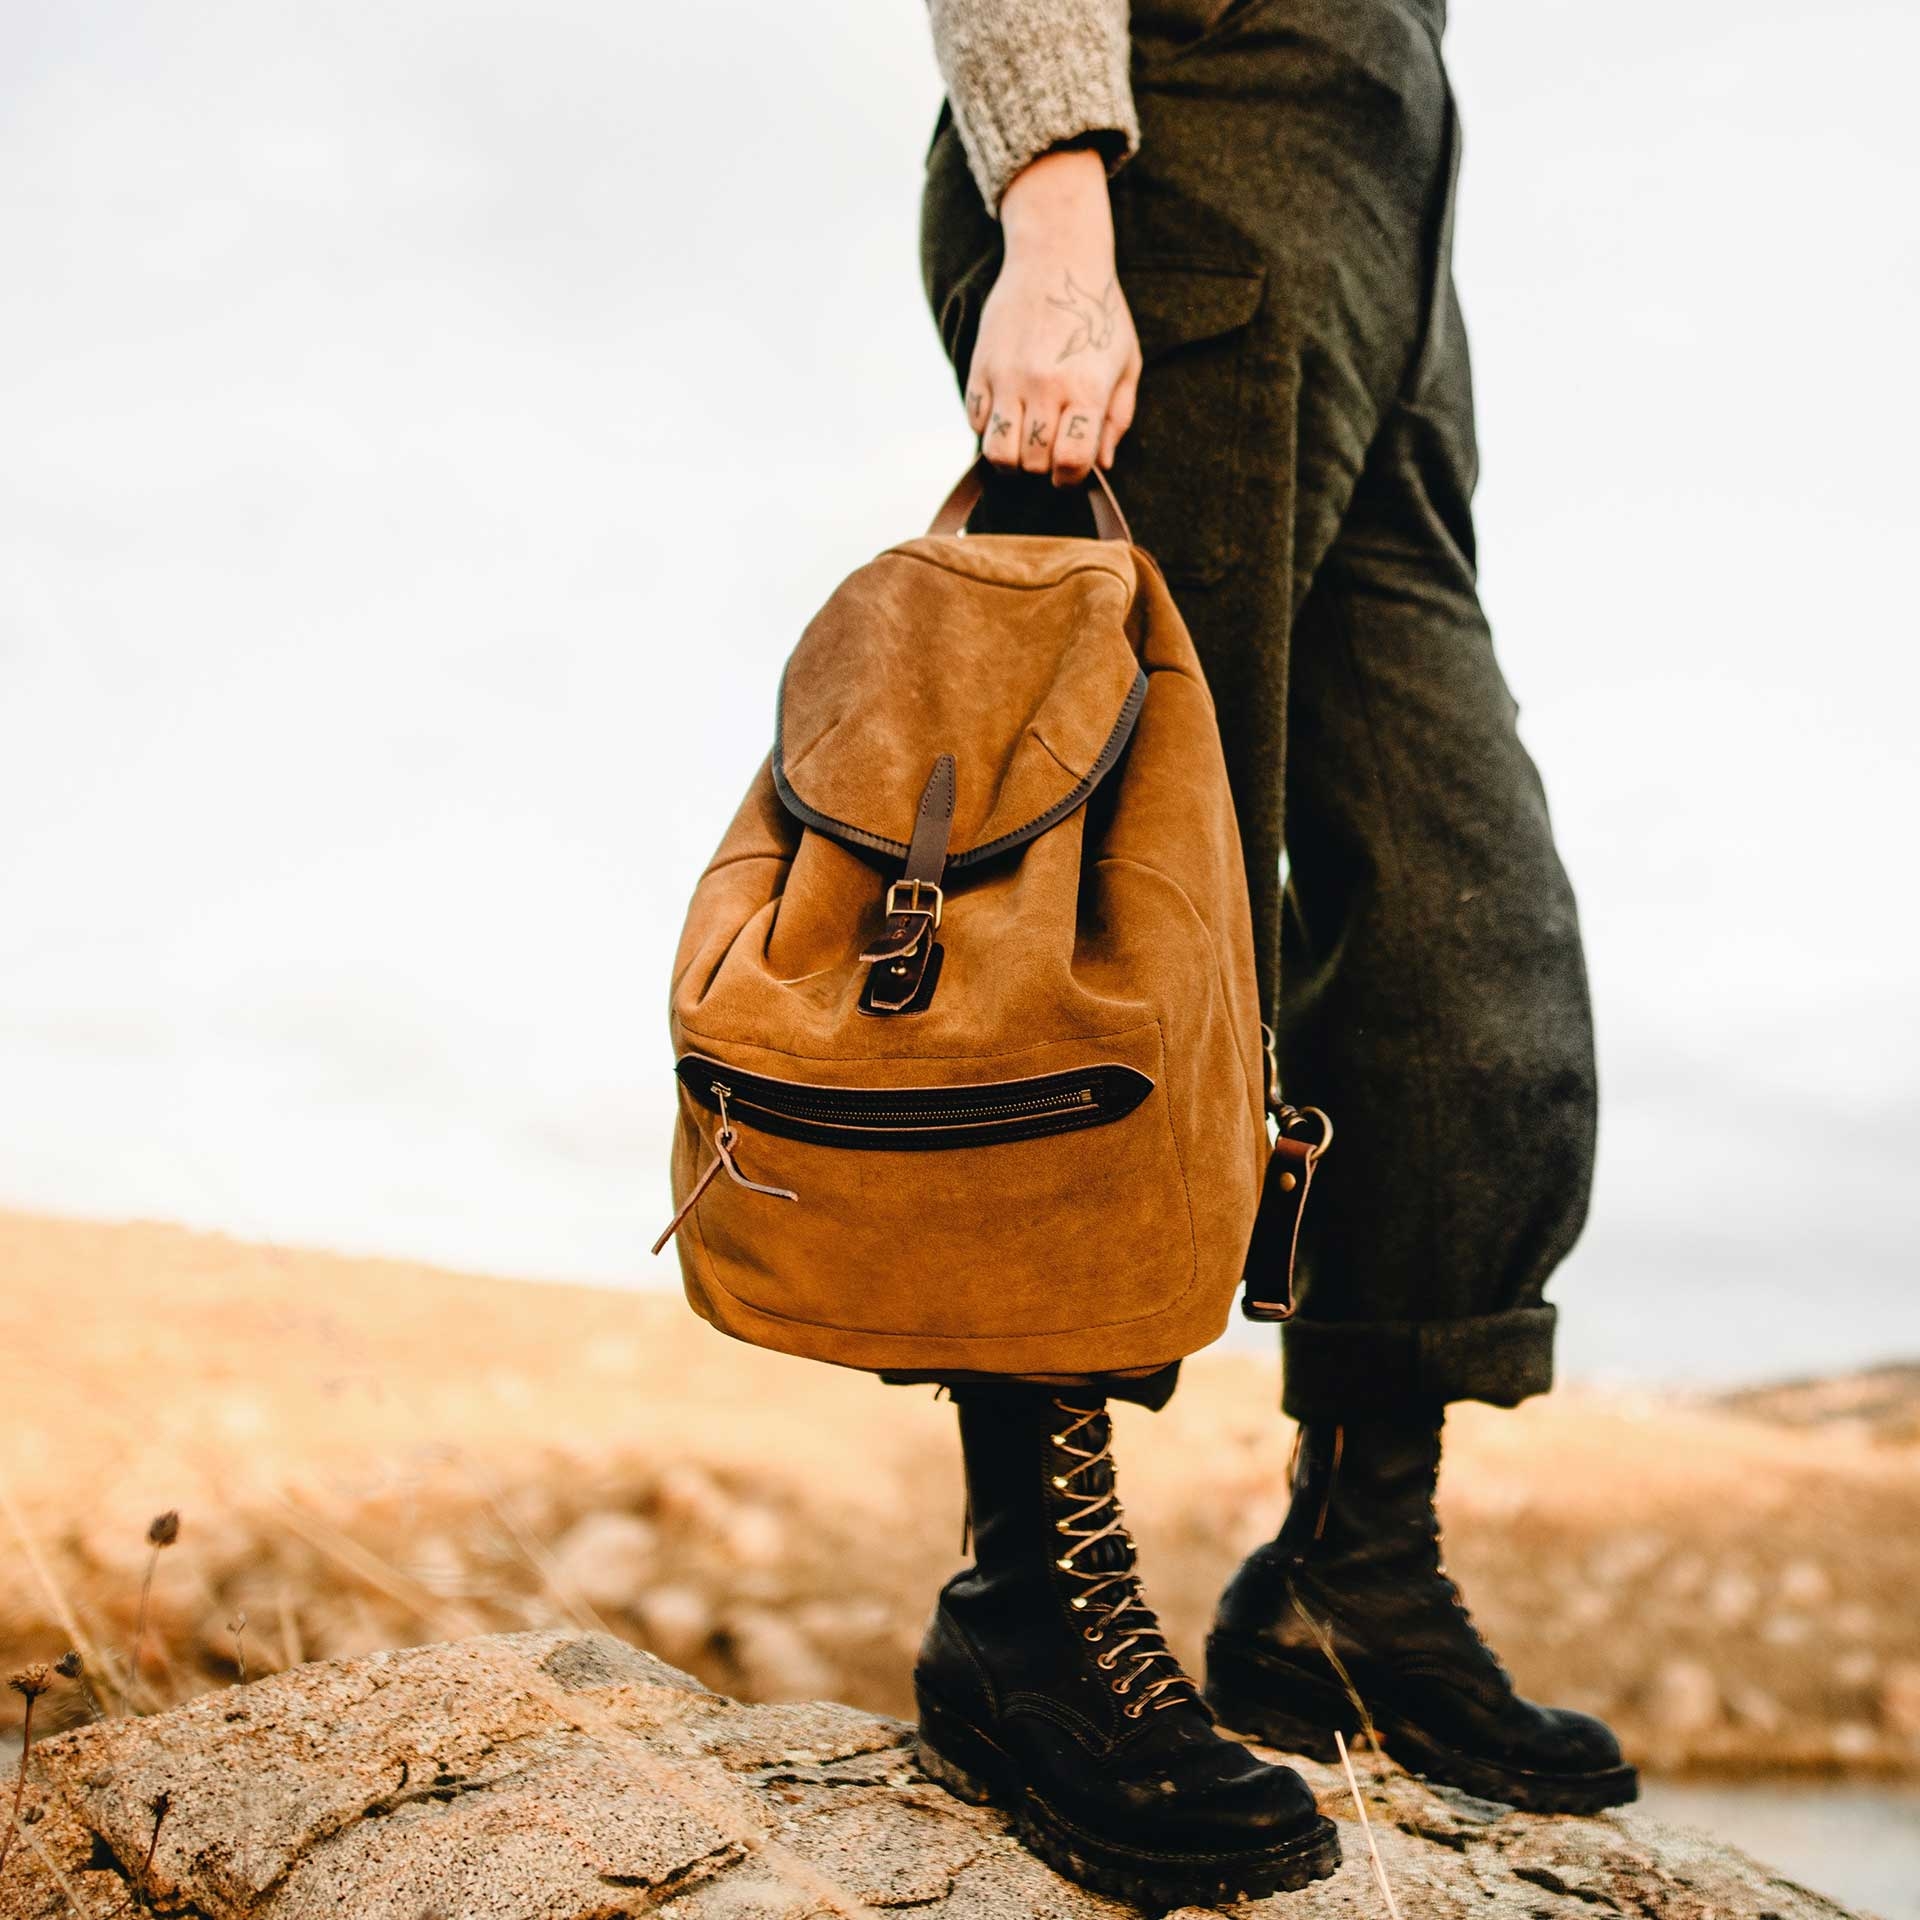 bleu de chauffe - The Camp suede leather backpack shot in good